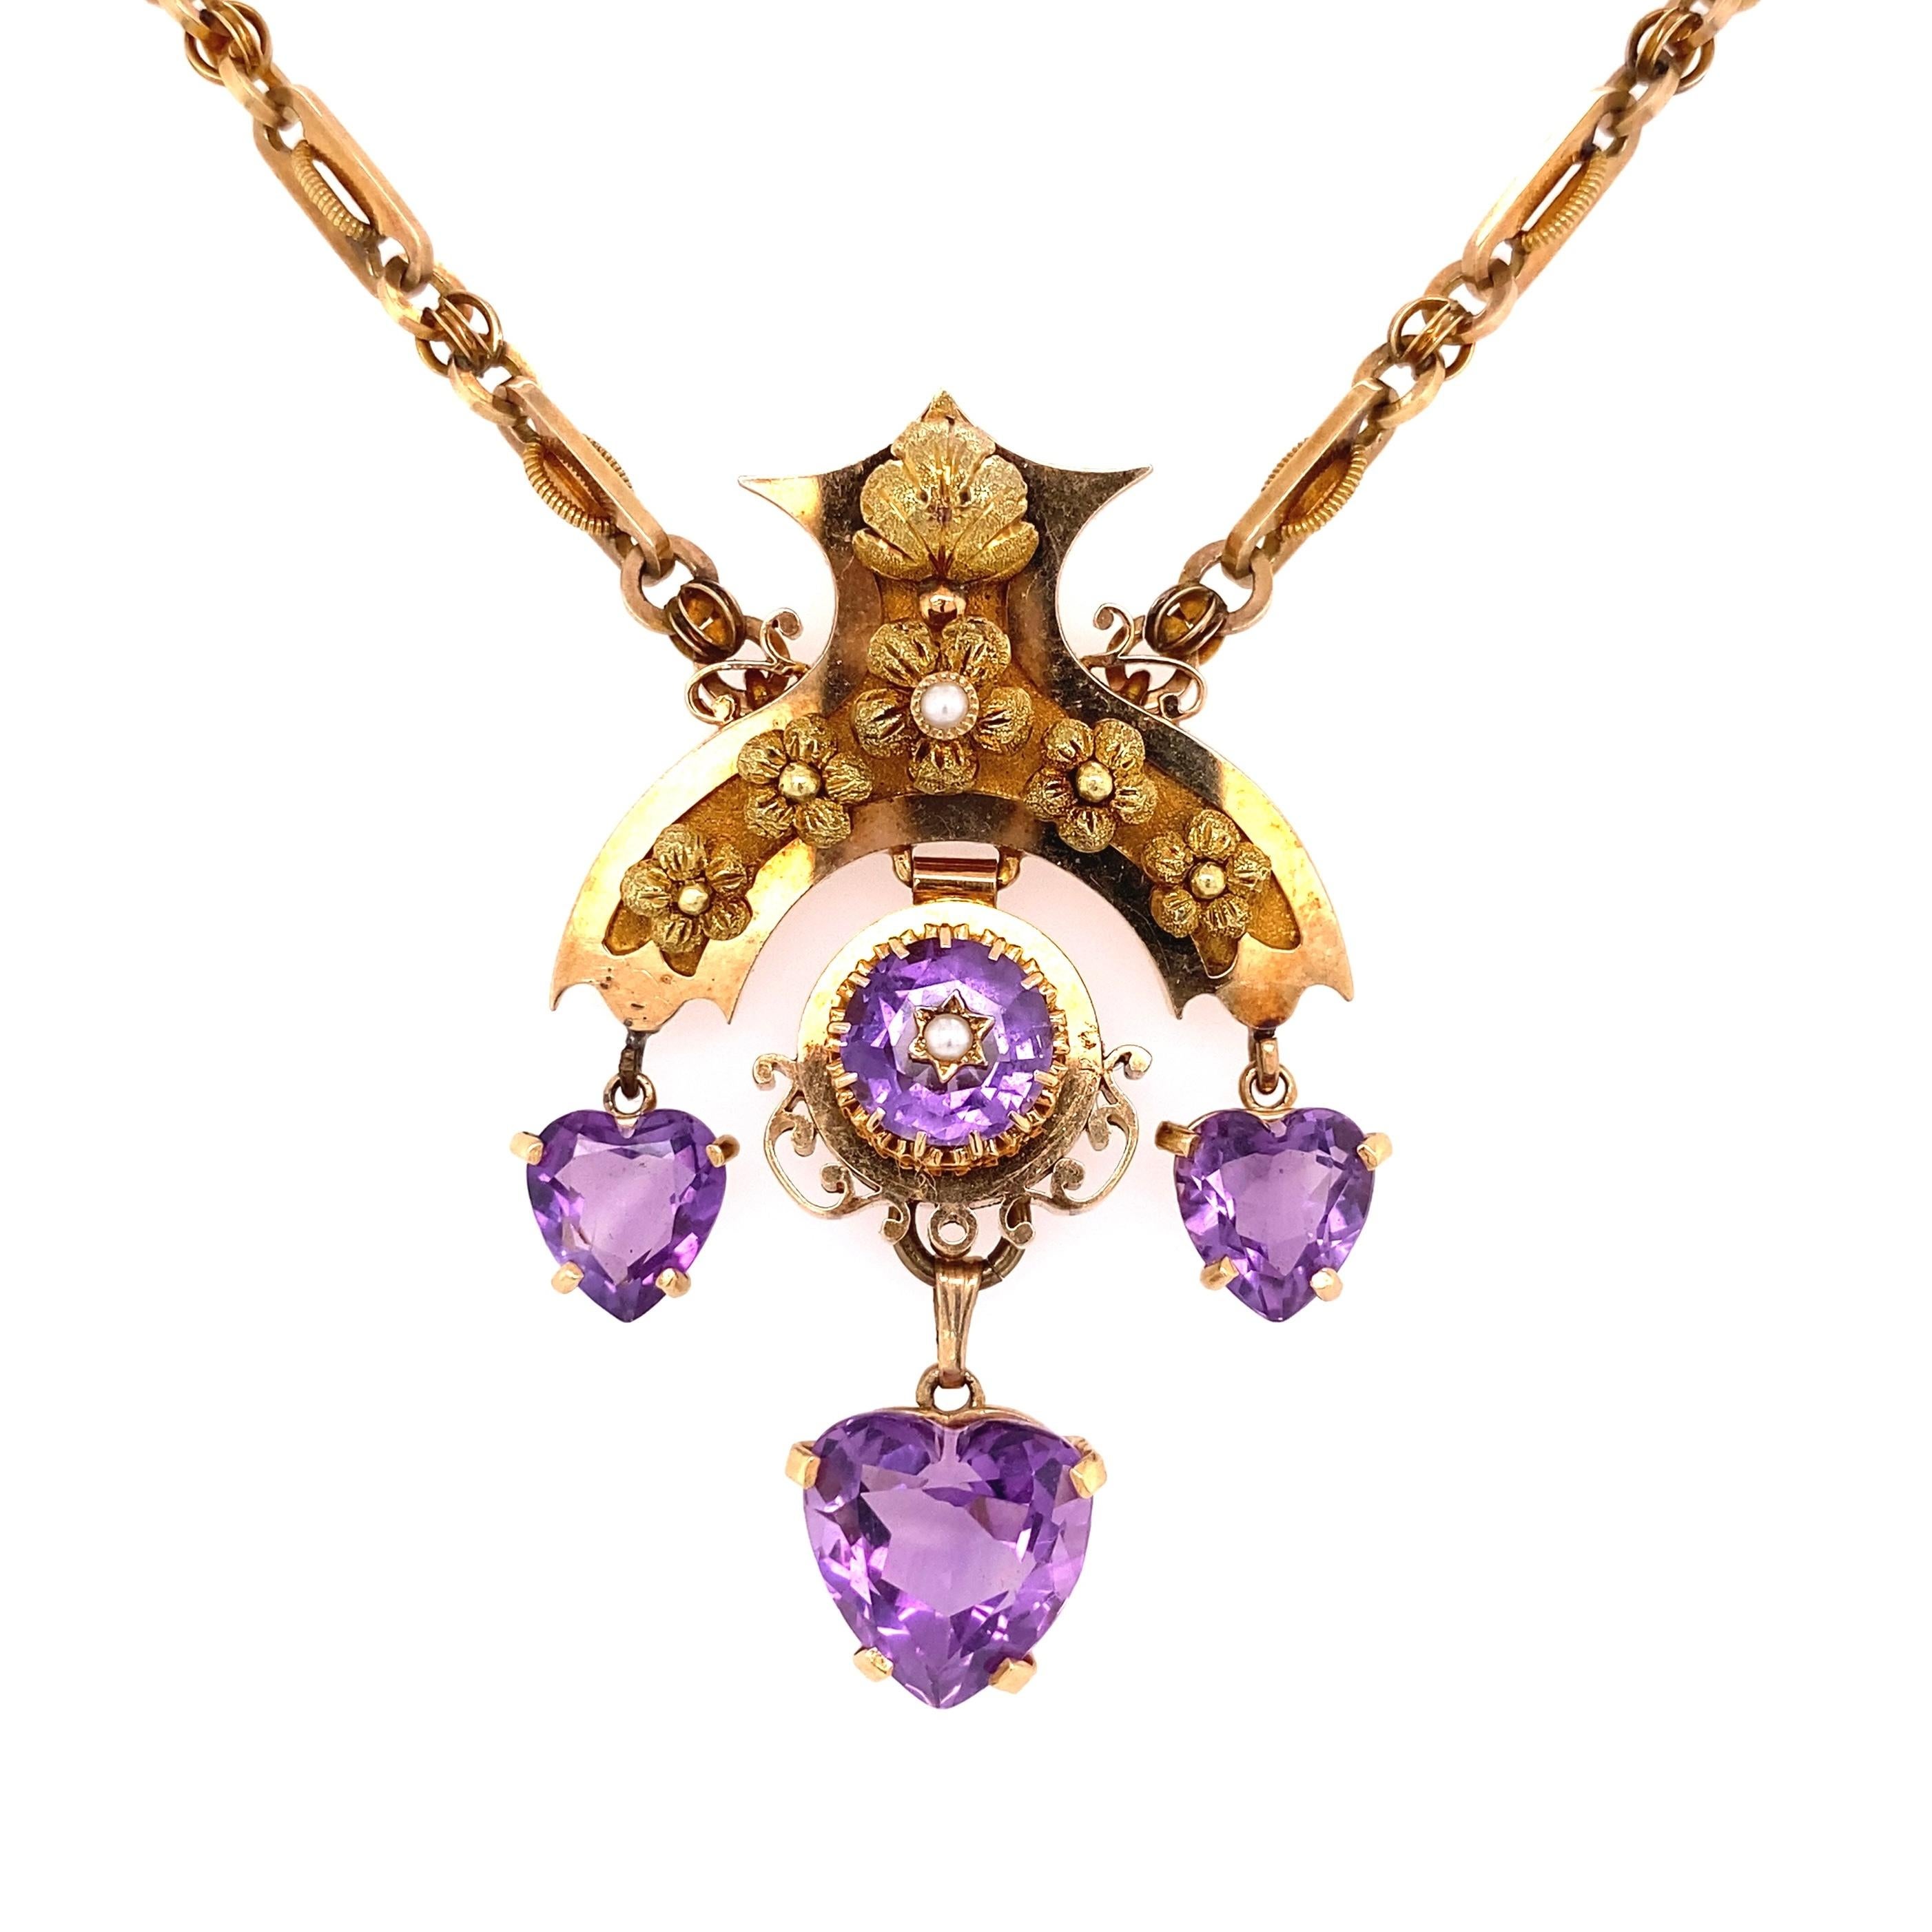 Simply Beautifully! Victorian Amethyst Hearts and Seed Pearl Gold Necklace. Hand set with 3 Amethyst Hearts dangling from a stylized Gold Crown. Suspended from a 14K Yellow Gold intricately Hand crafted Link Chain. Pendant measures approx. 2.35” l x